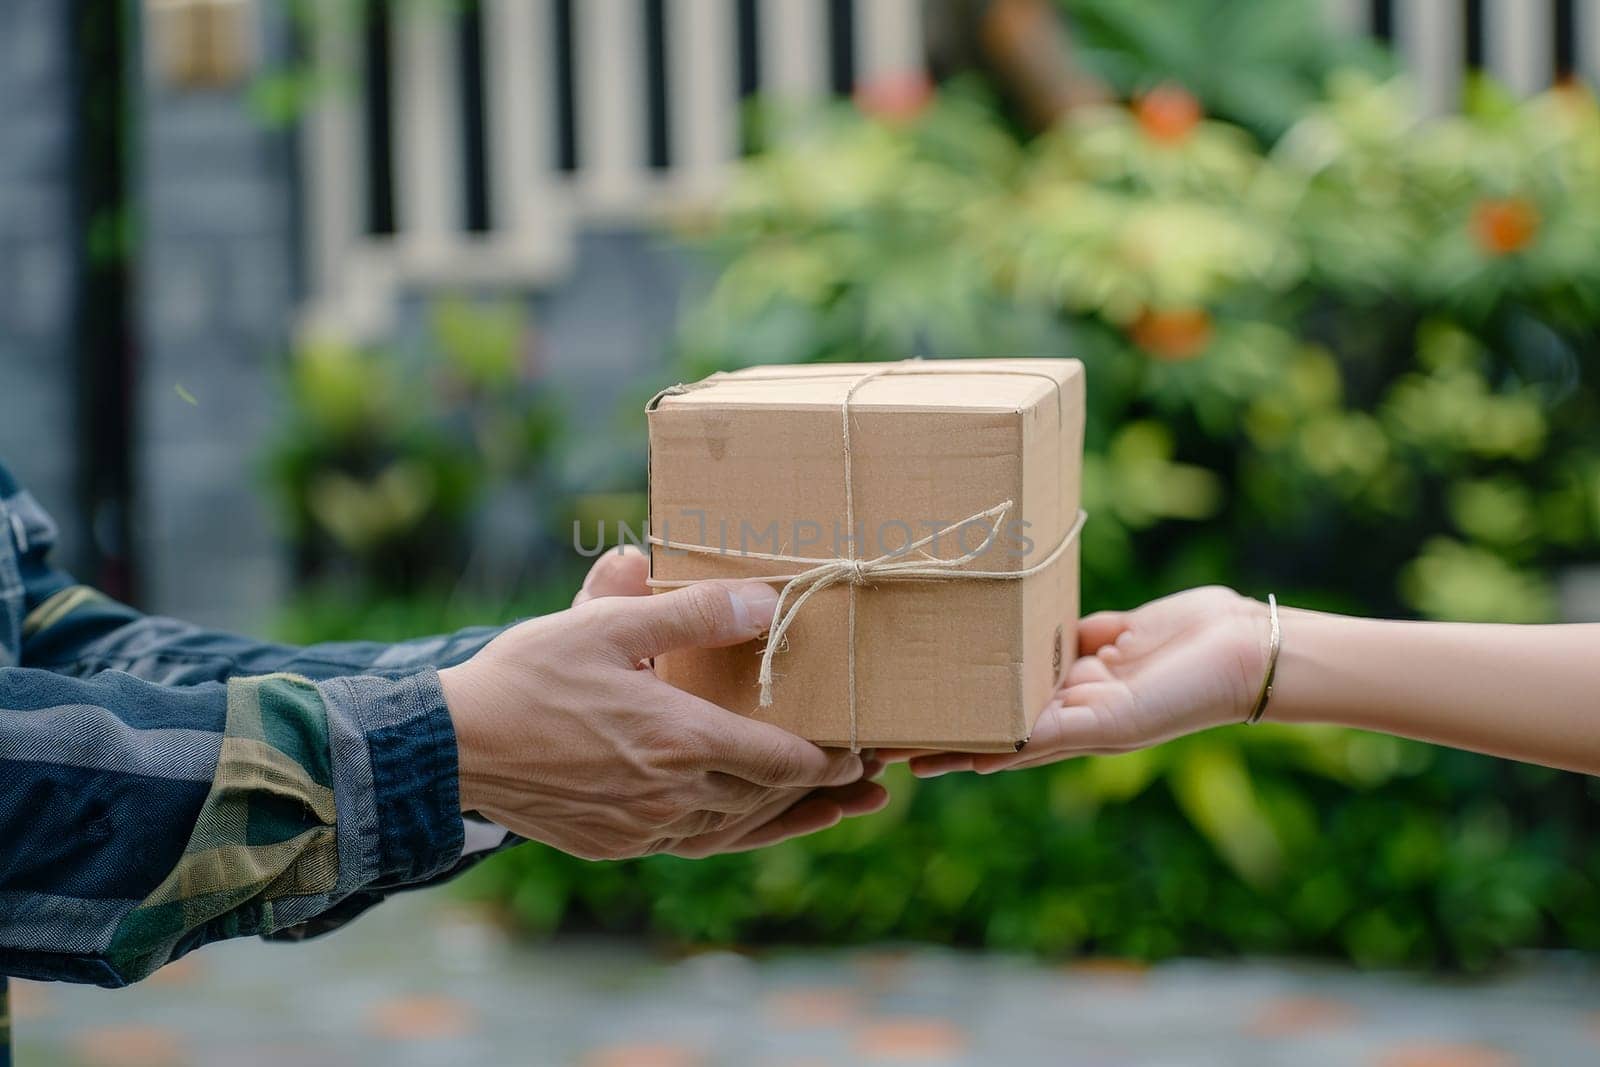 Man hand accepting a delivery of boxes from deliveryman, Delivery concept.